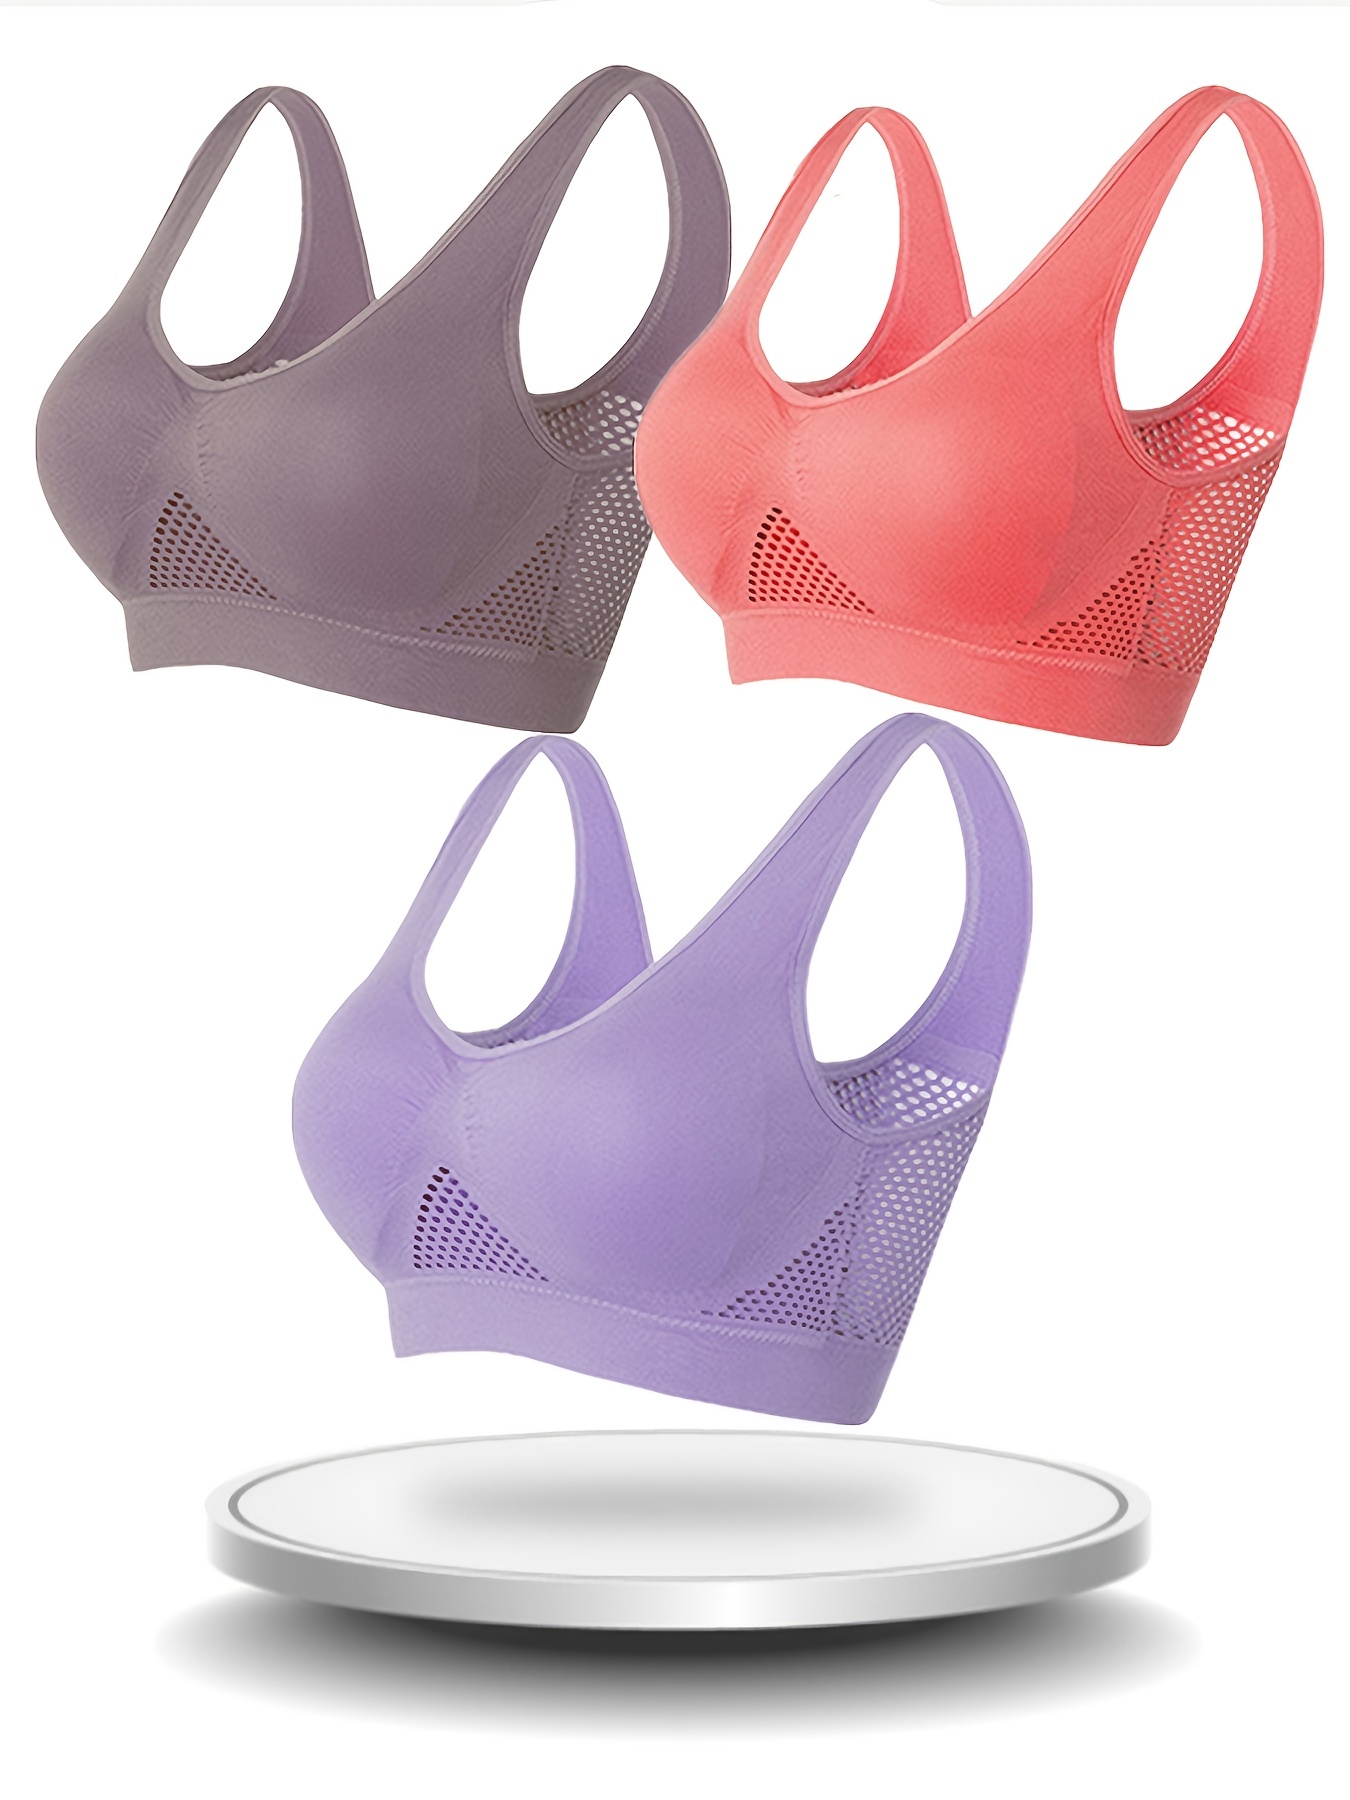 EMY Sports Bra for Women 1 2 3 5 Pack Space Dye Removable Pads for